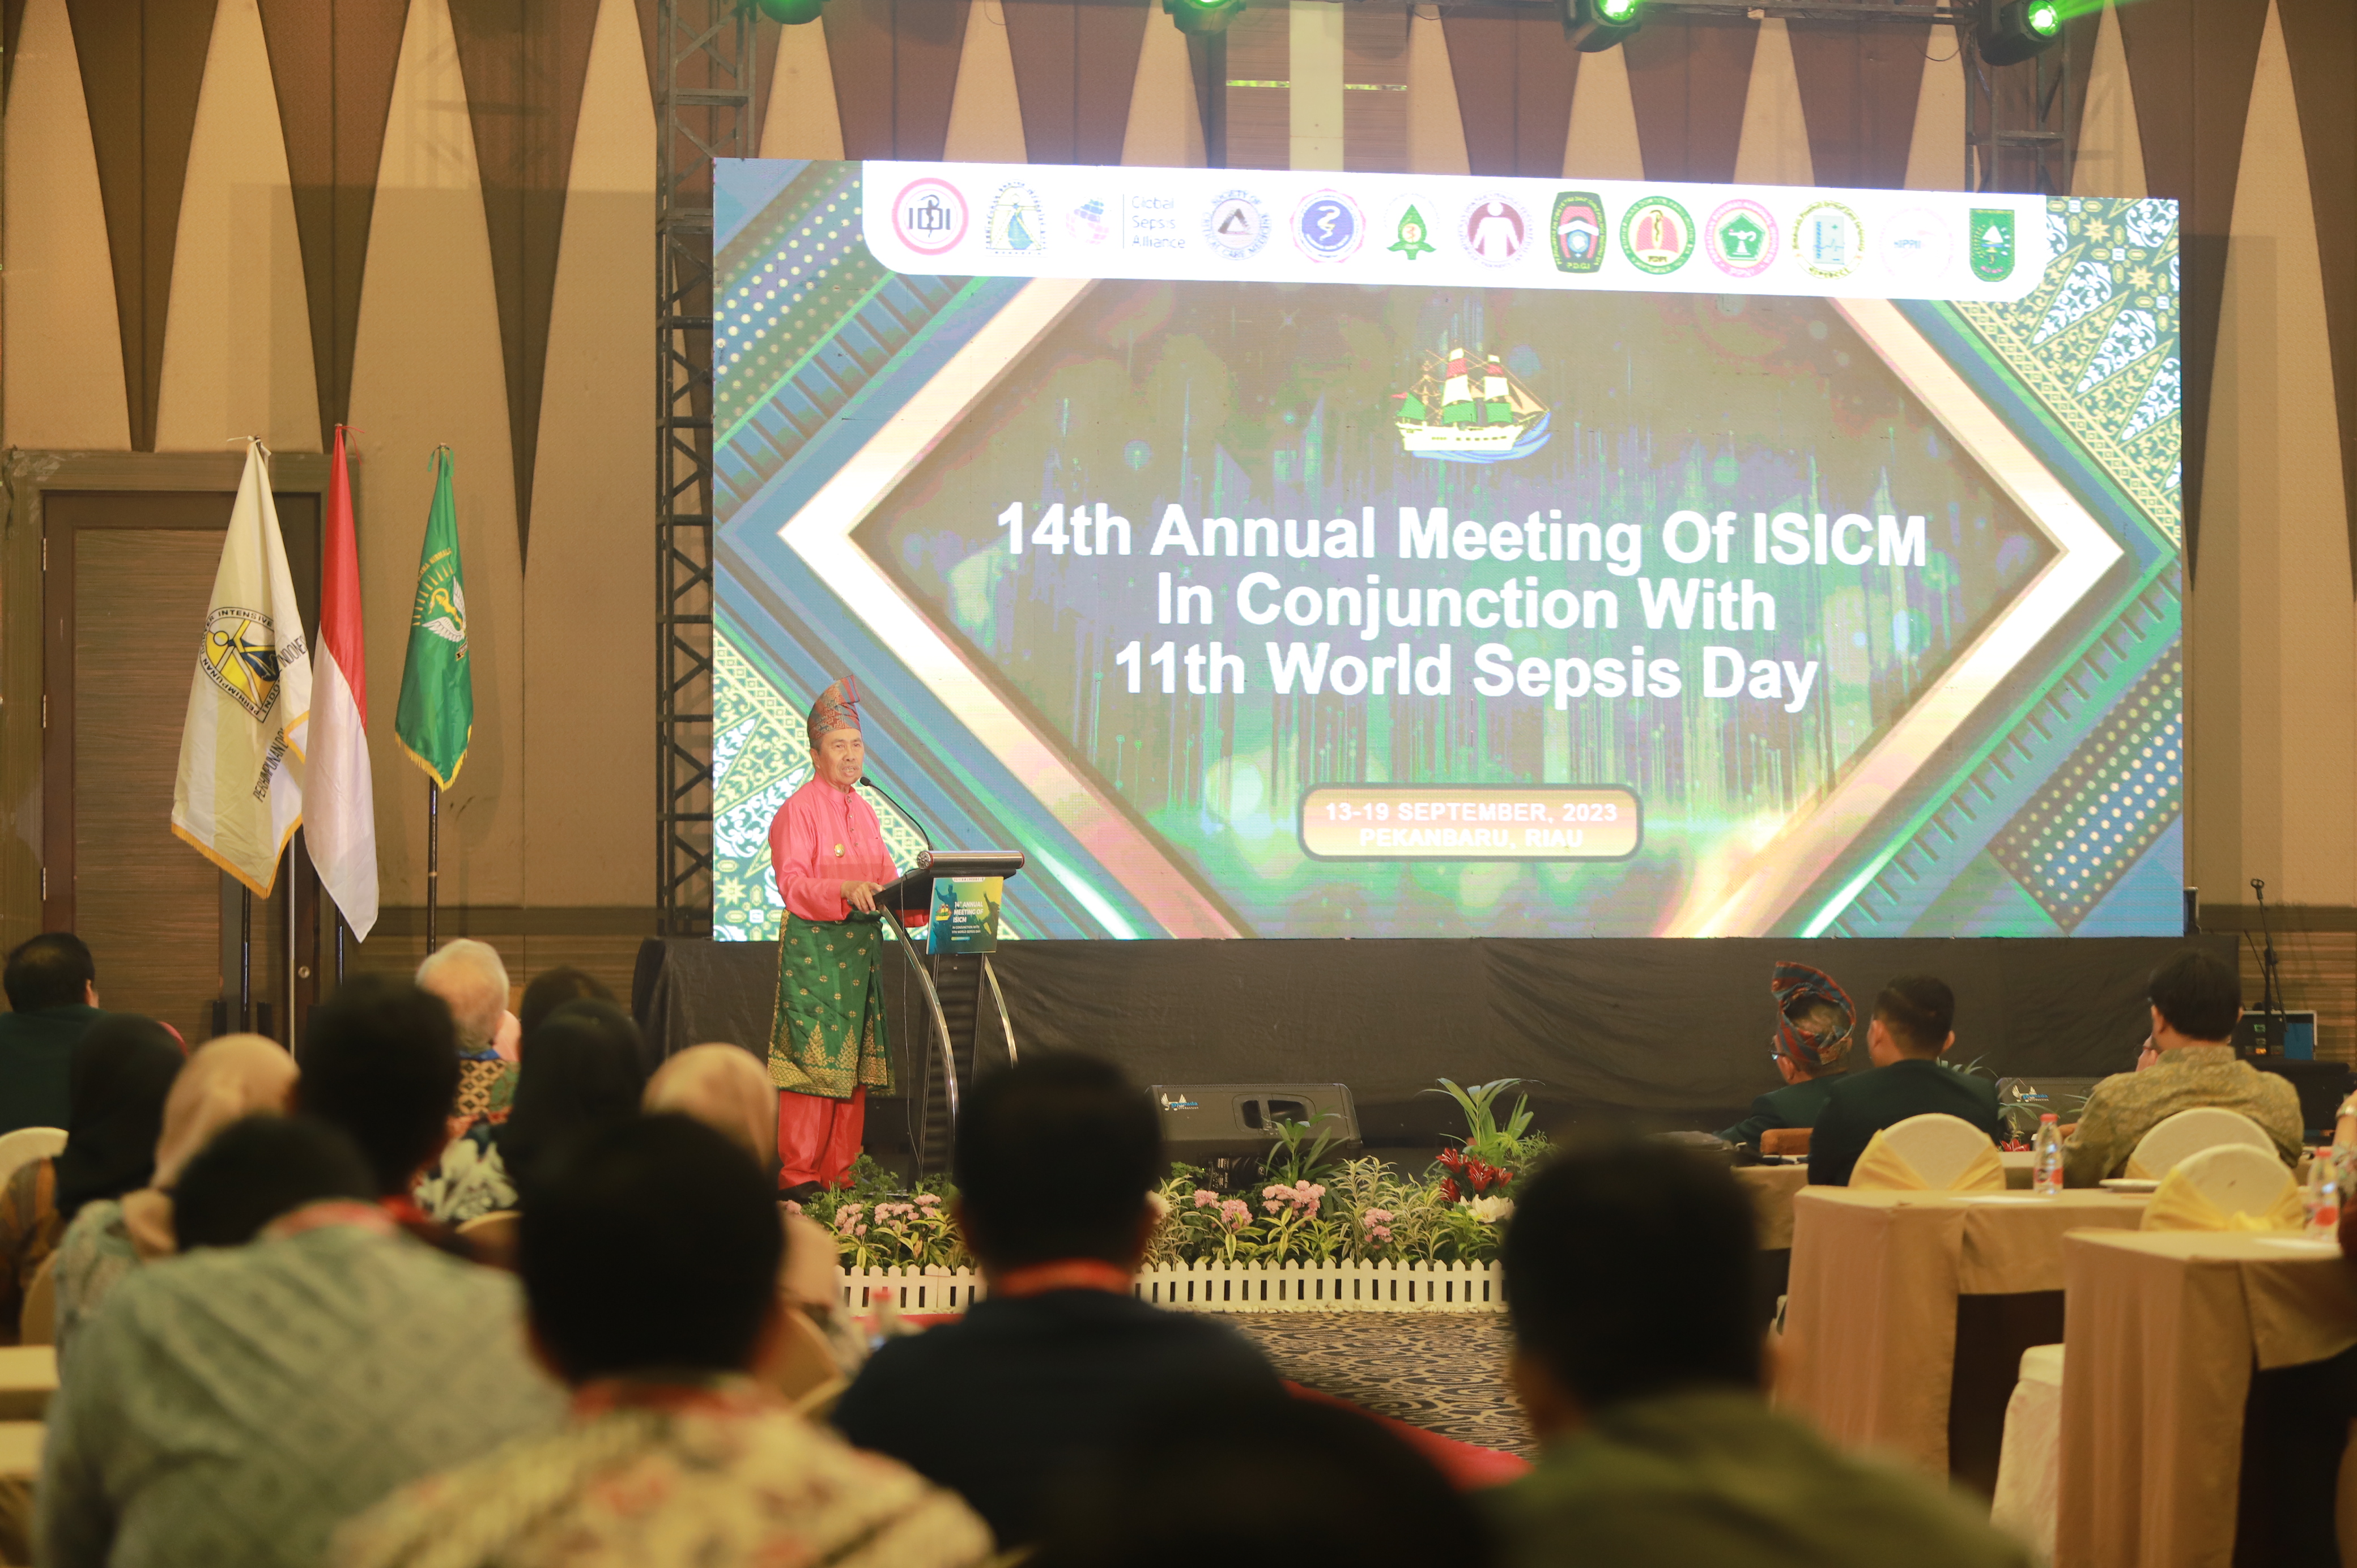 The 14th Annual Meeting Indonesian Society Of Intensive Care (ISICM) In Conjuction With 11th World Sepsis Day